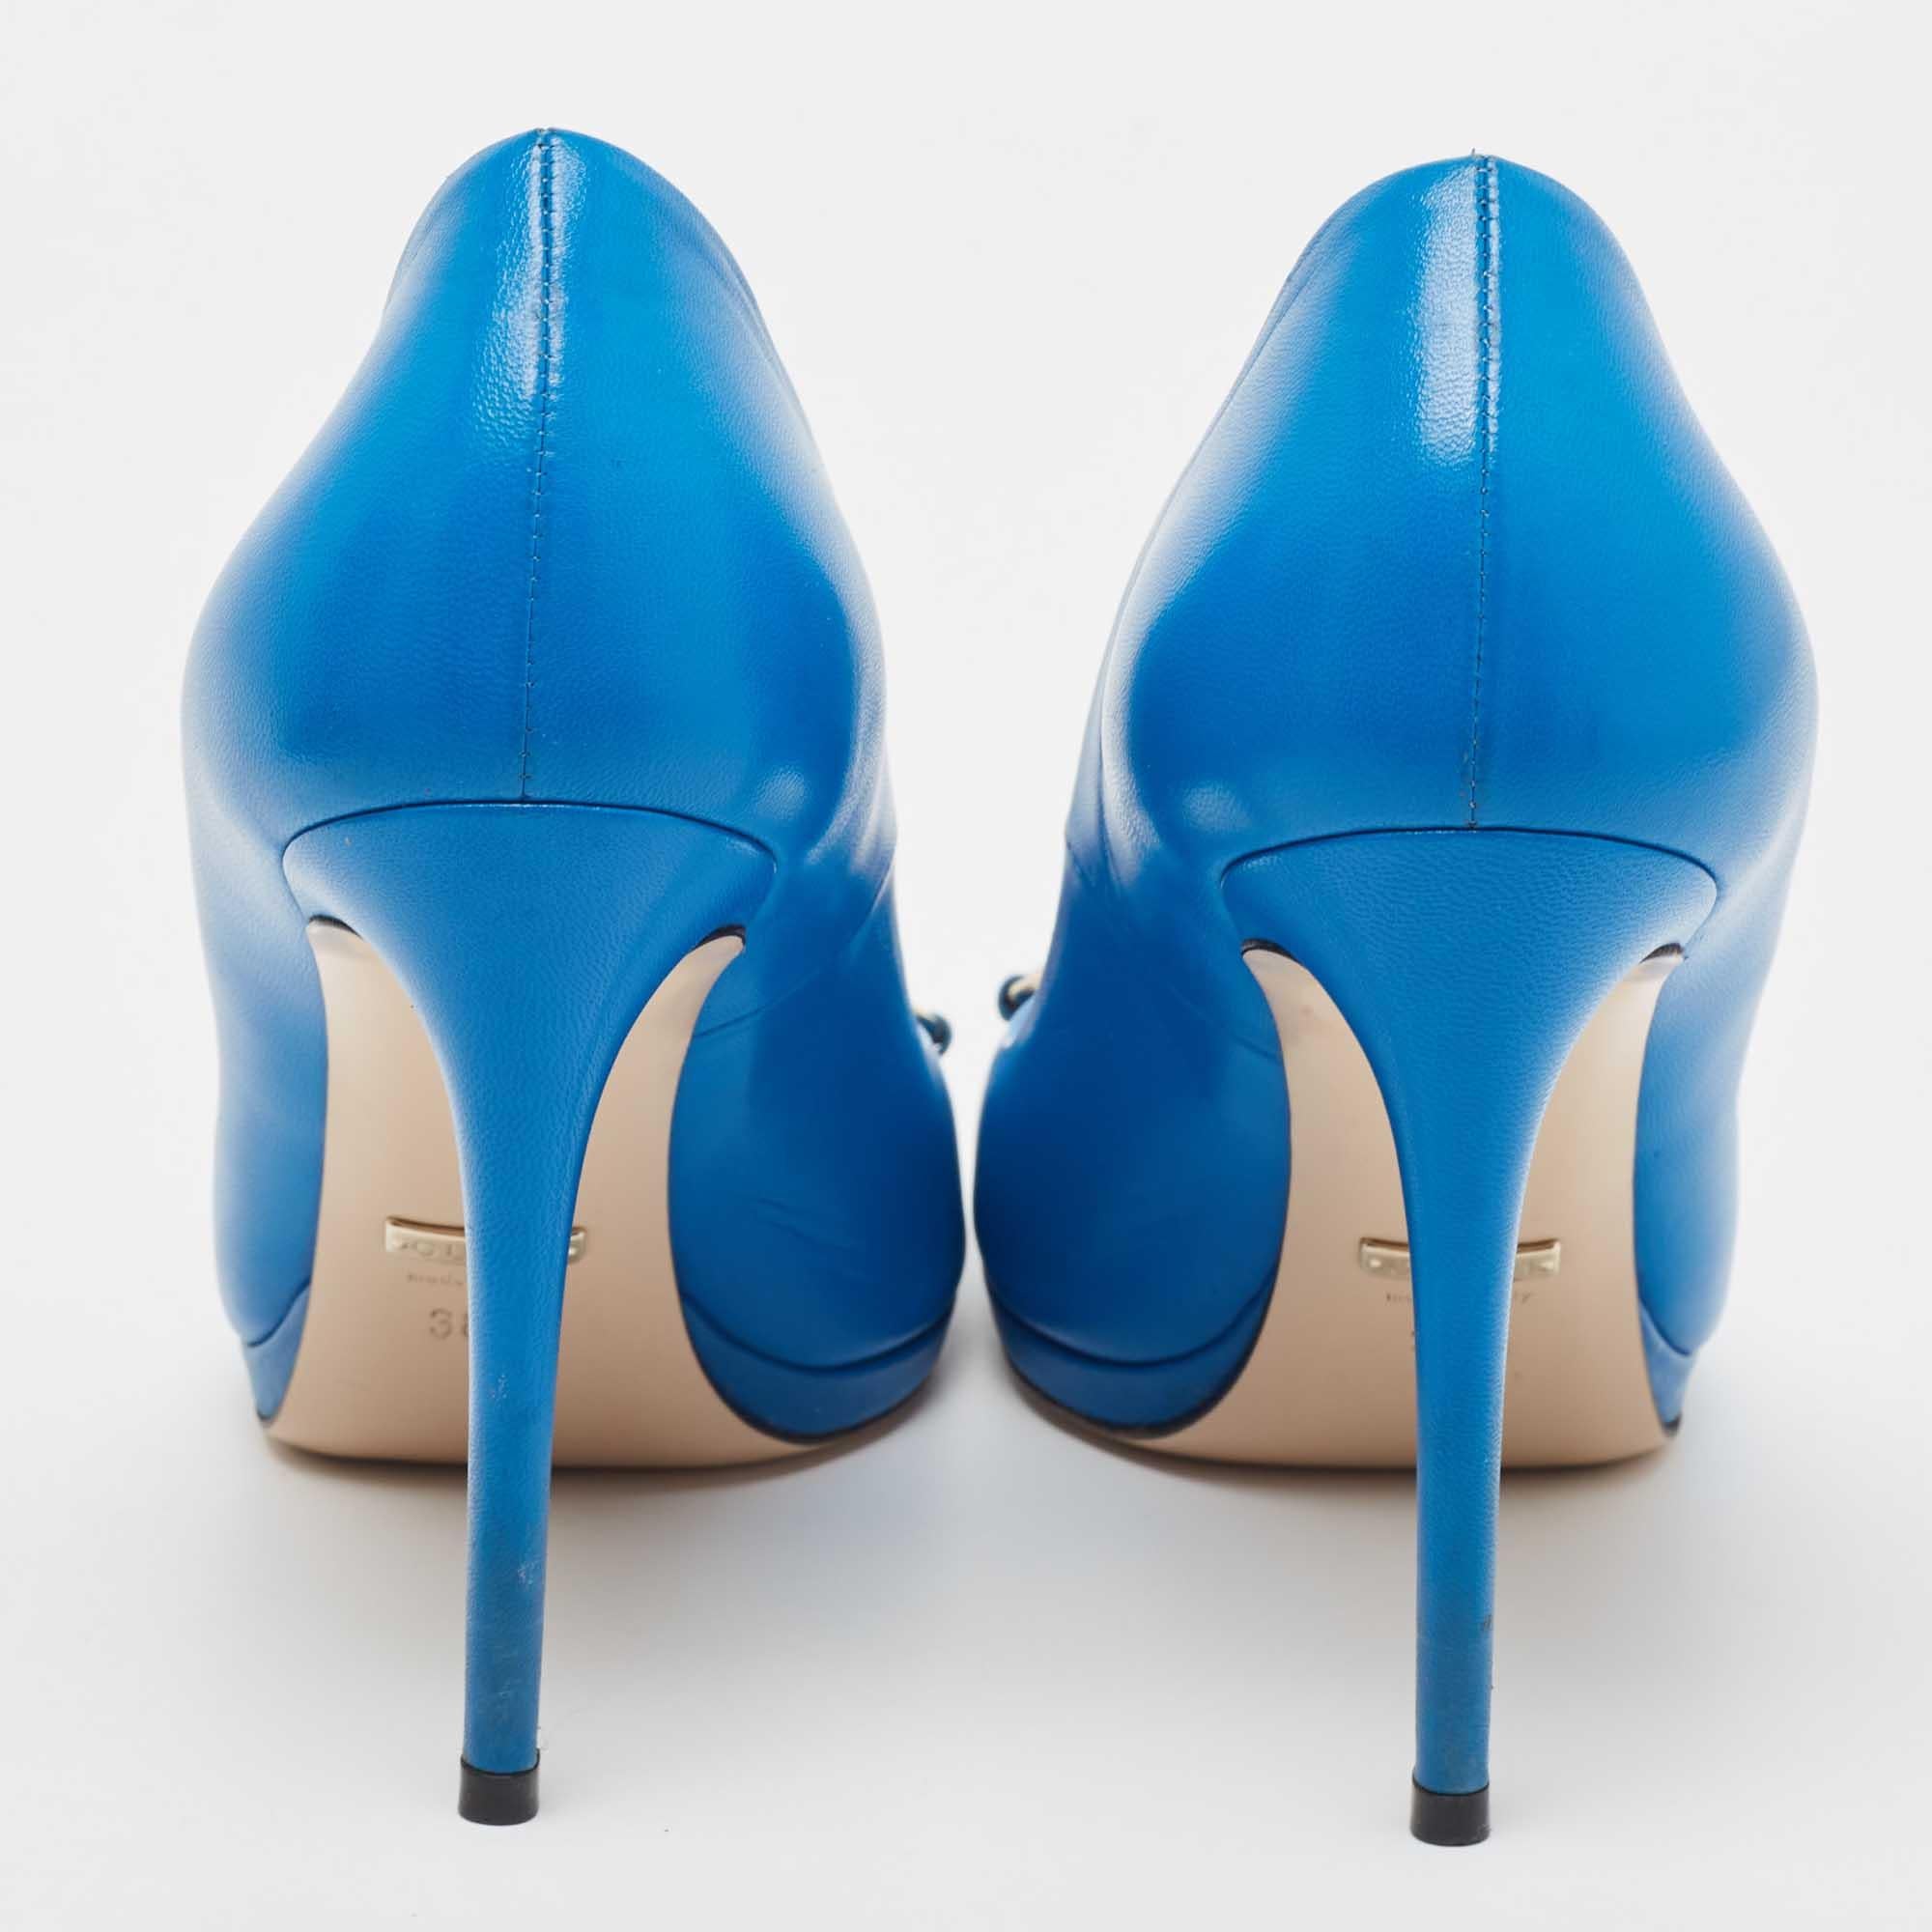 Gucci Blue Leather New Hollywood Platform Pumps Size 38.5 In Good Condition For Sale In Dubai, Al Qouz 2